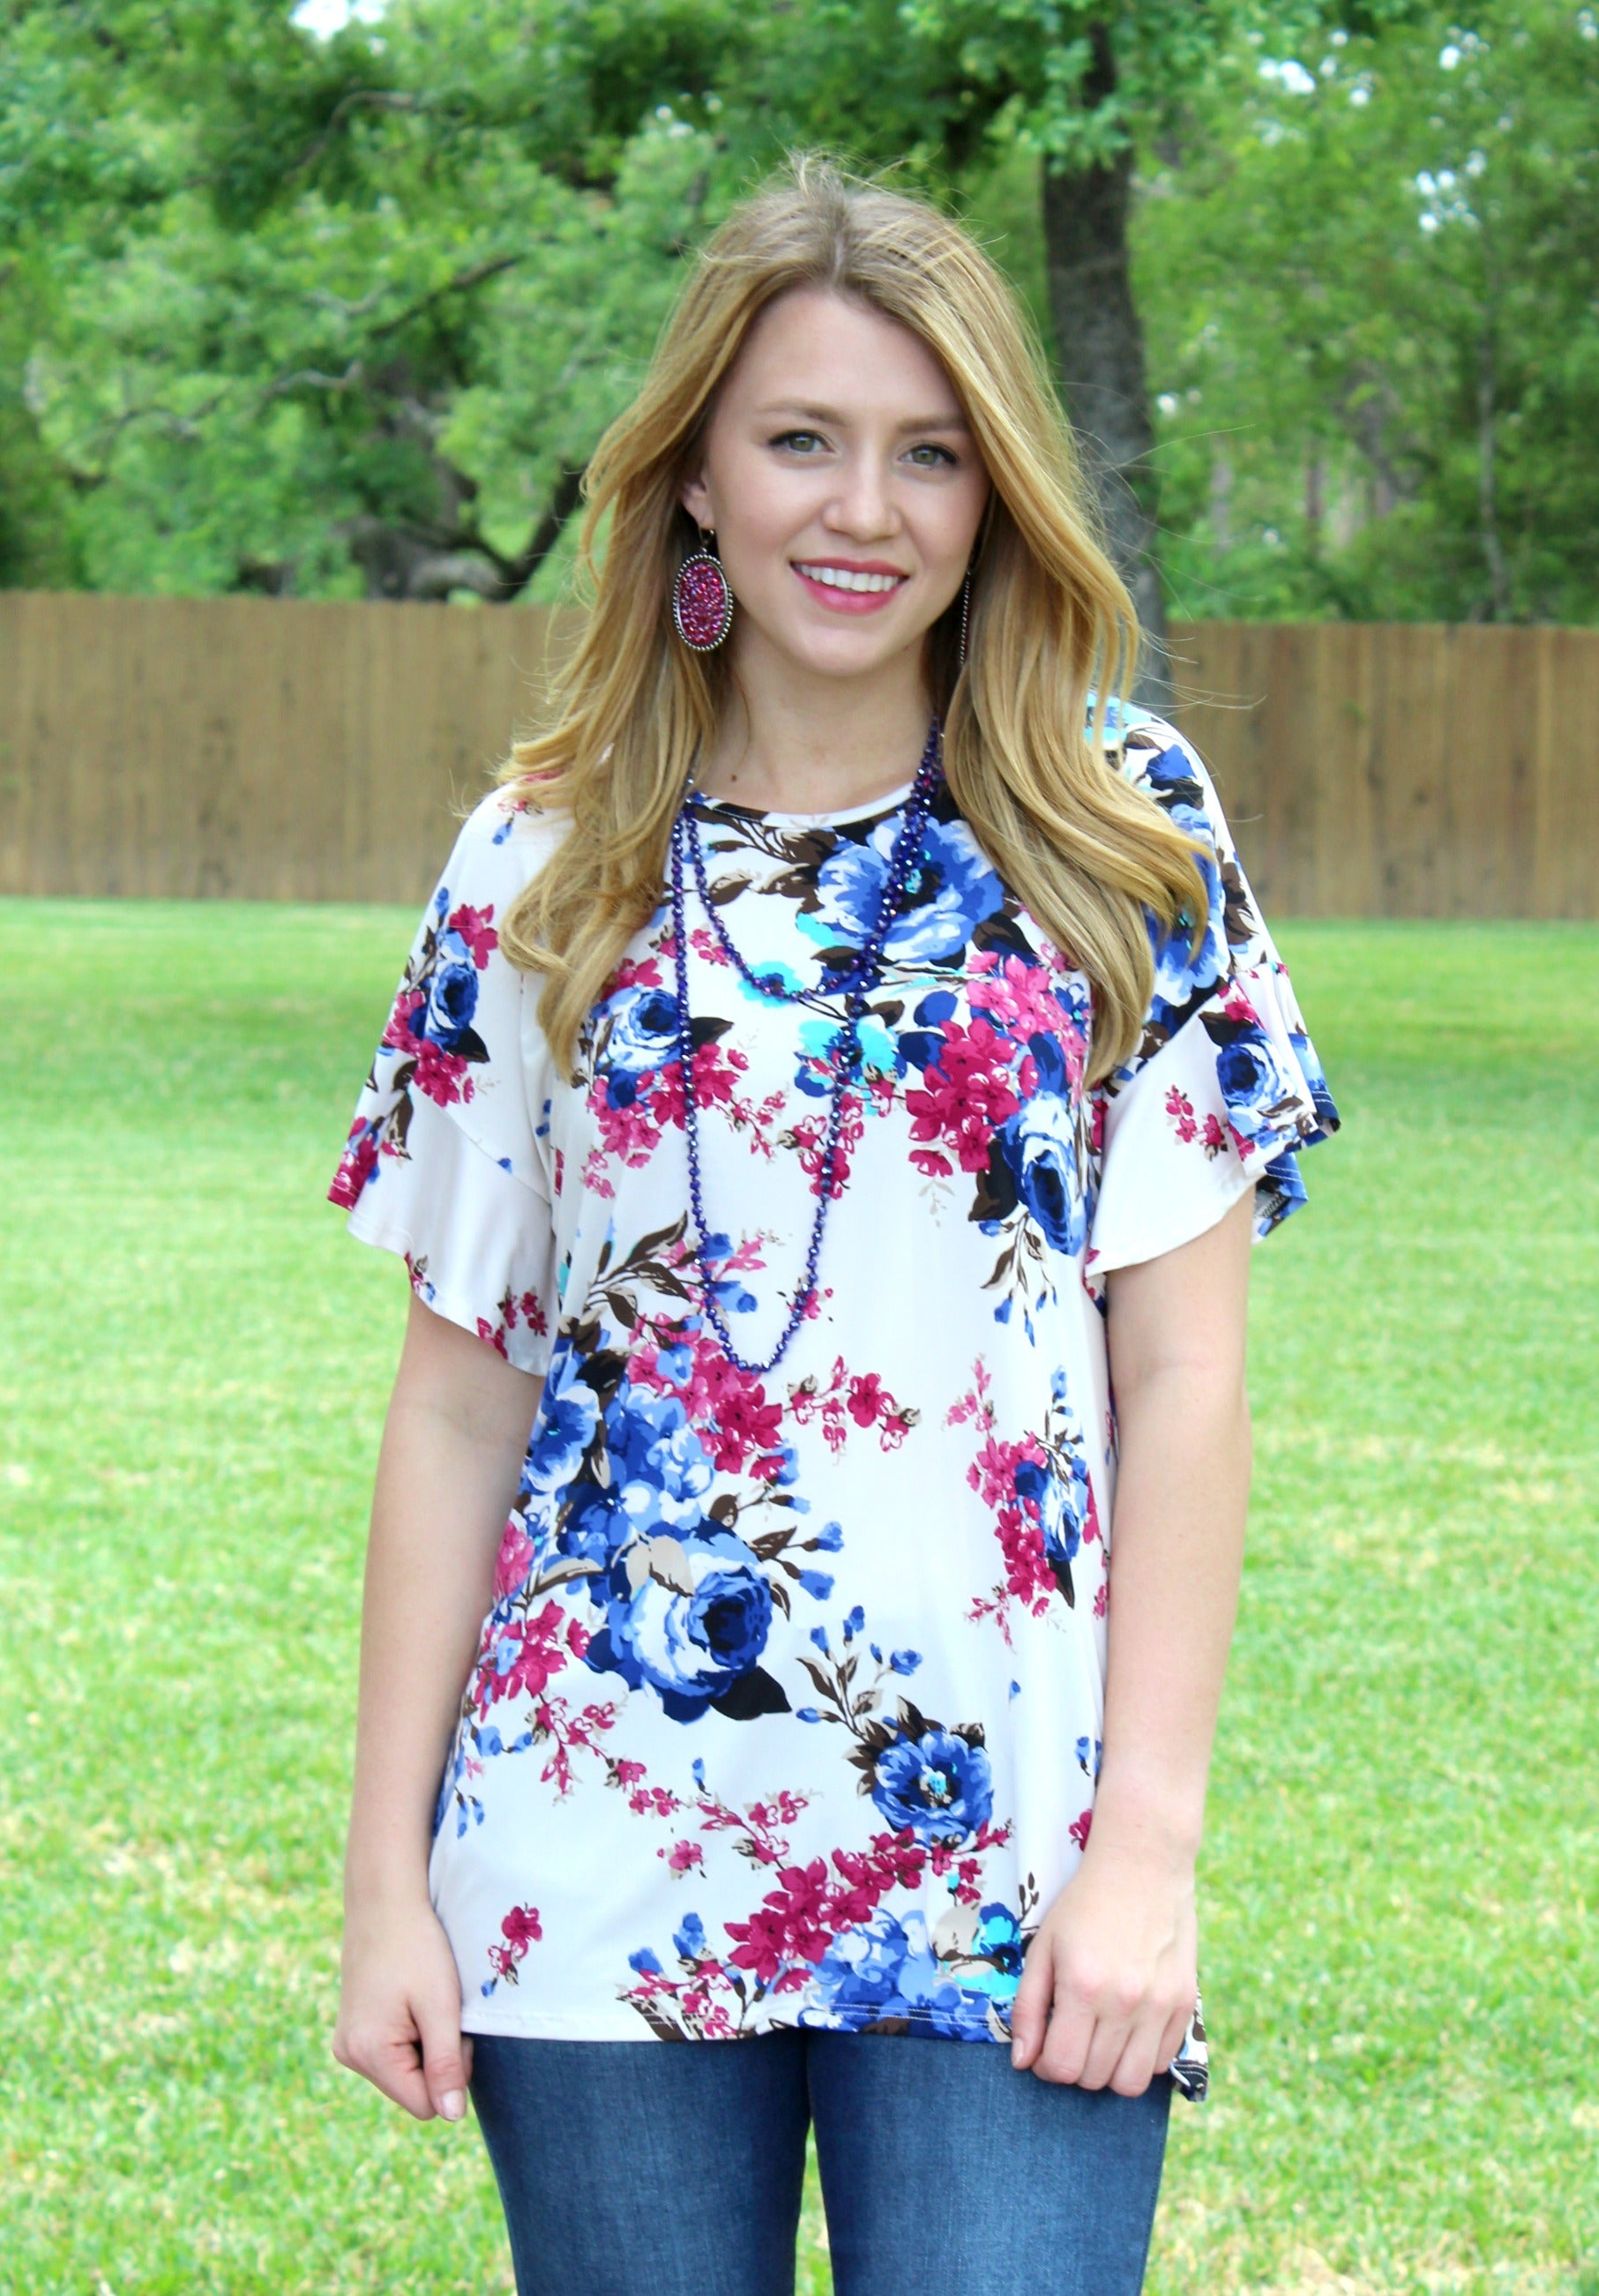 Last Chance Size Small | Sweeter Than Fiction Floral Short Sleeve Top in Ivory - Giddy Up Glamour Boutique